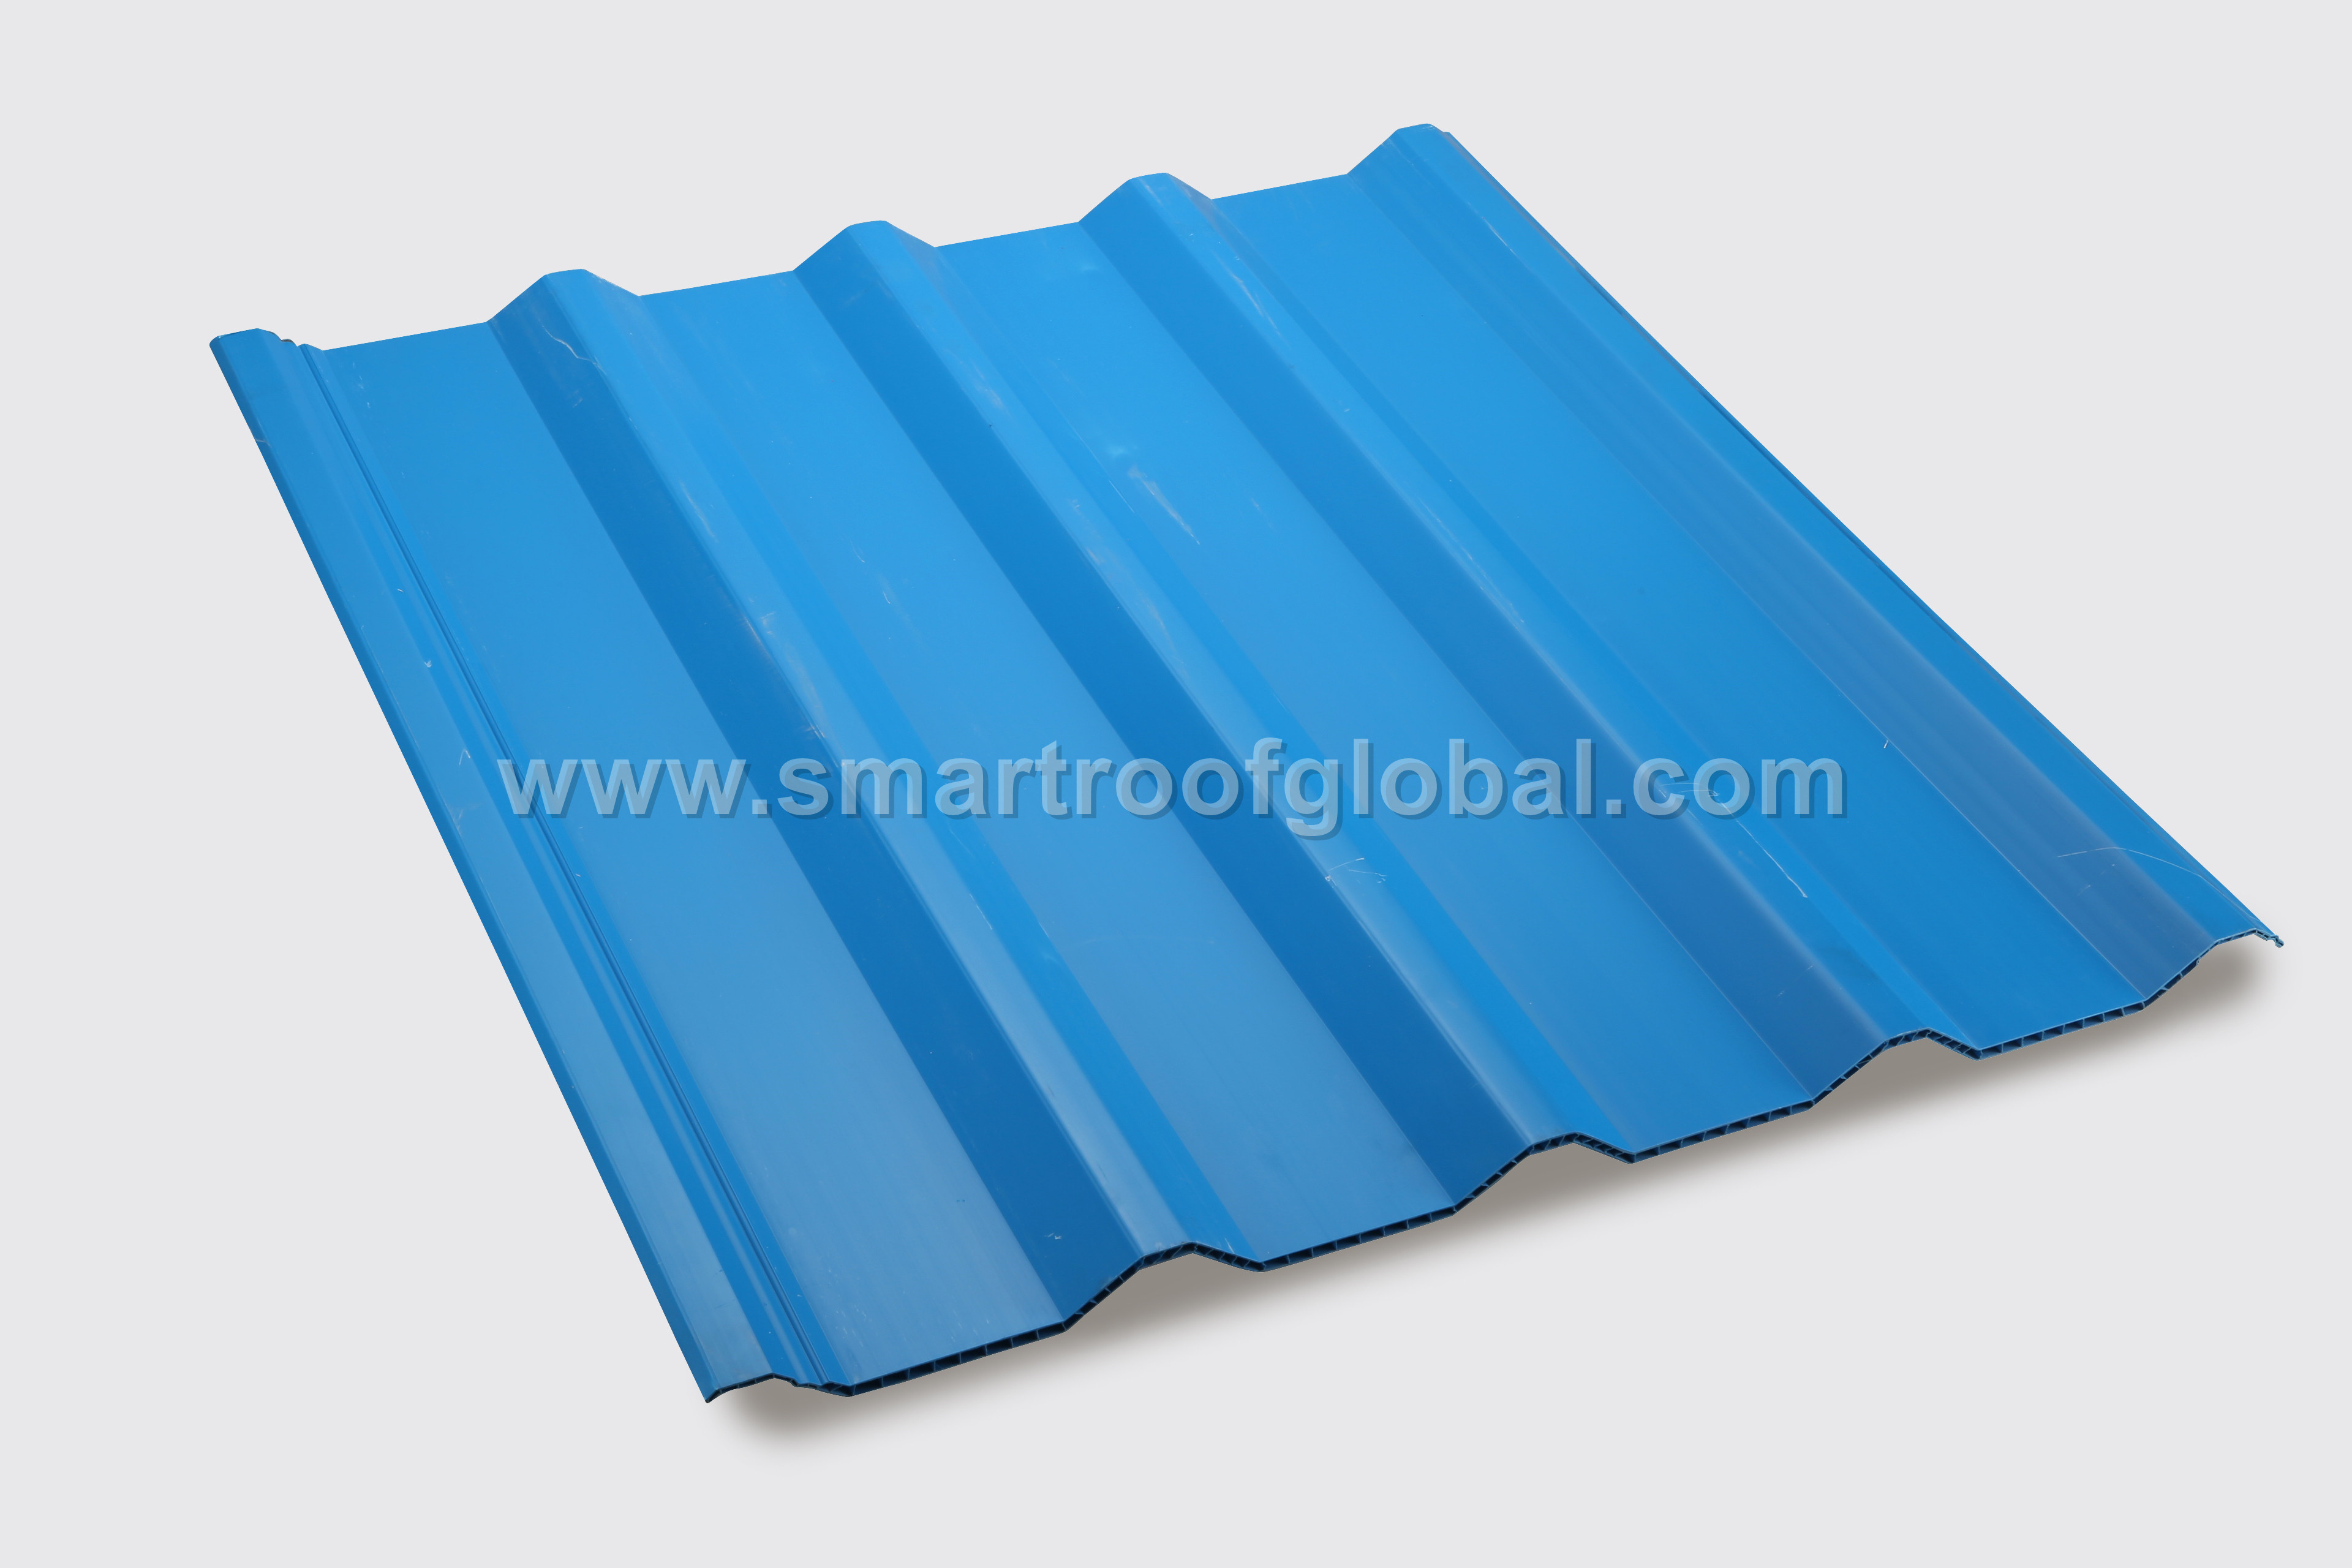 Plastic Roofing Sheets, Corrugated Plastic Roofing Sheets Manufacturer